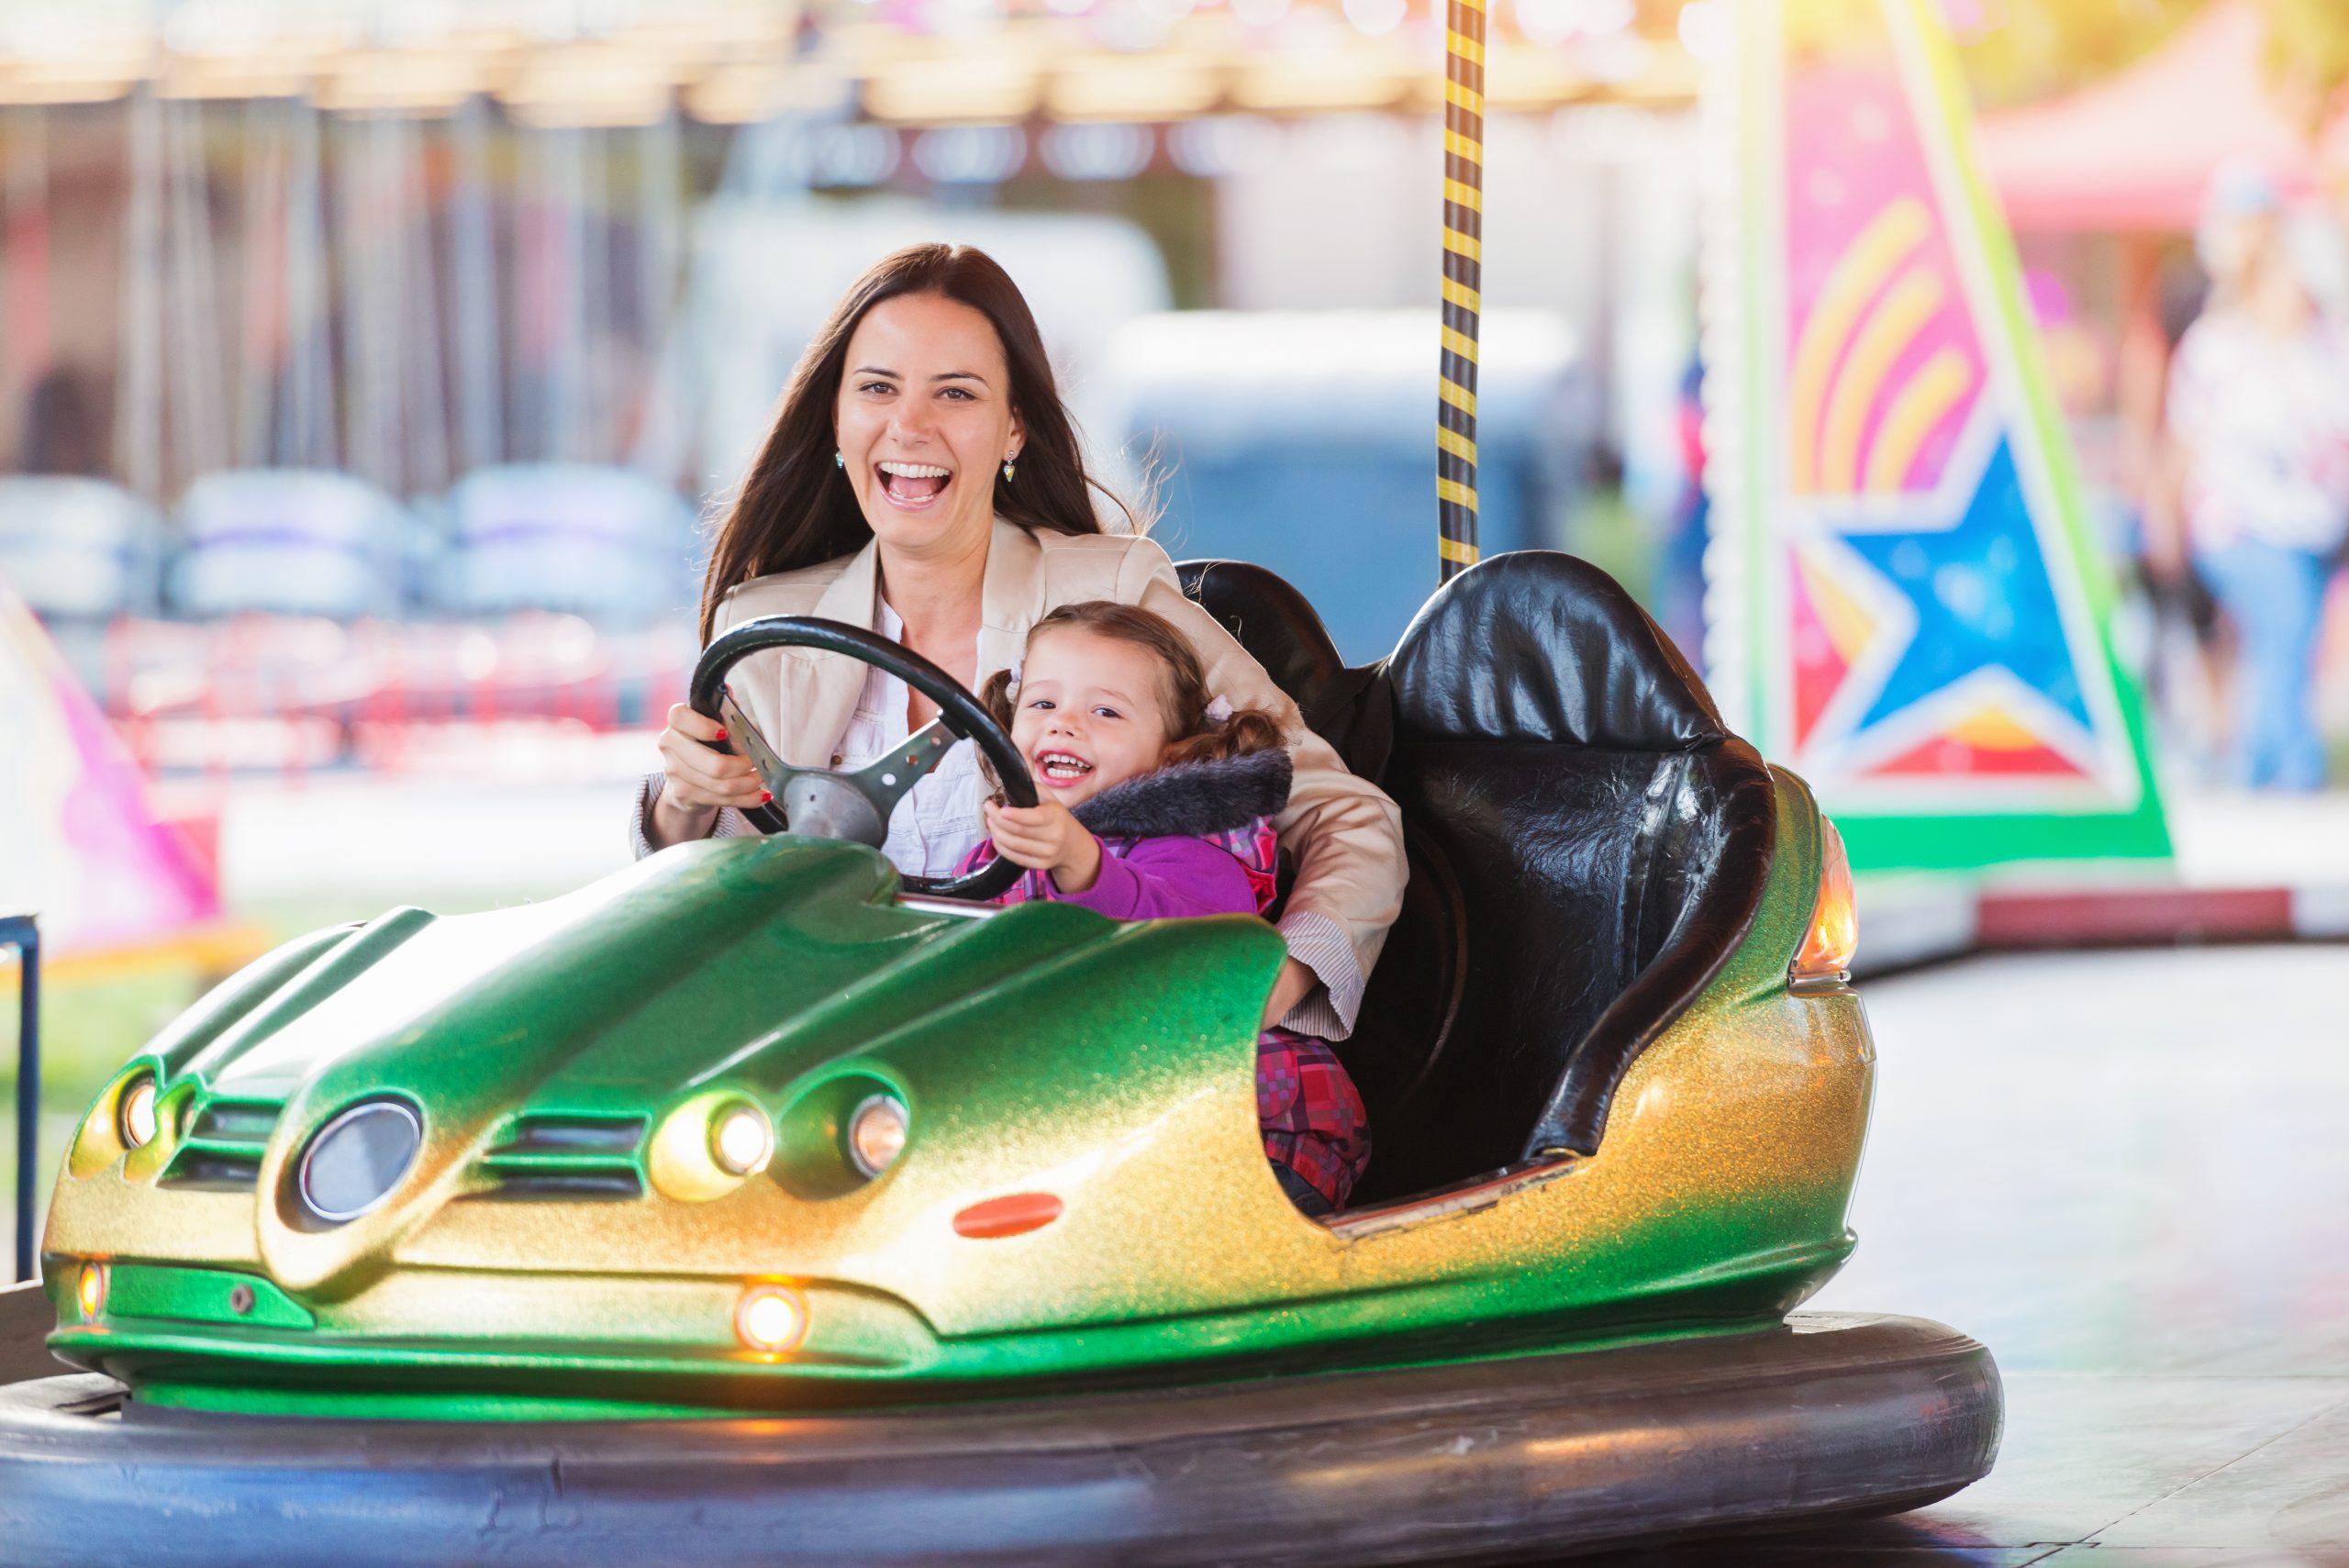 Mom and daughter ride bumper cars at the fair ©Ground Picture